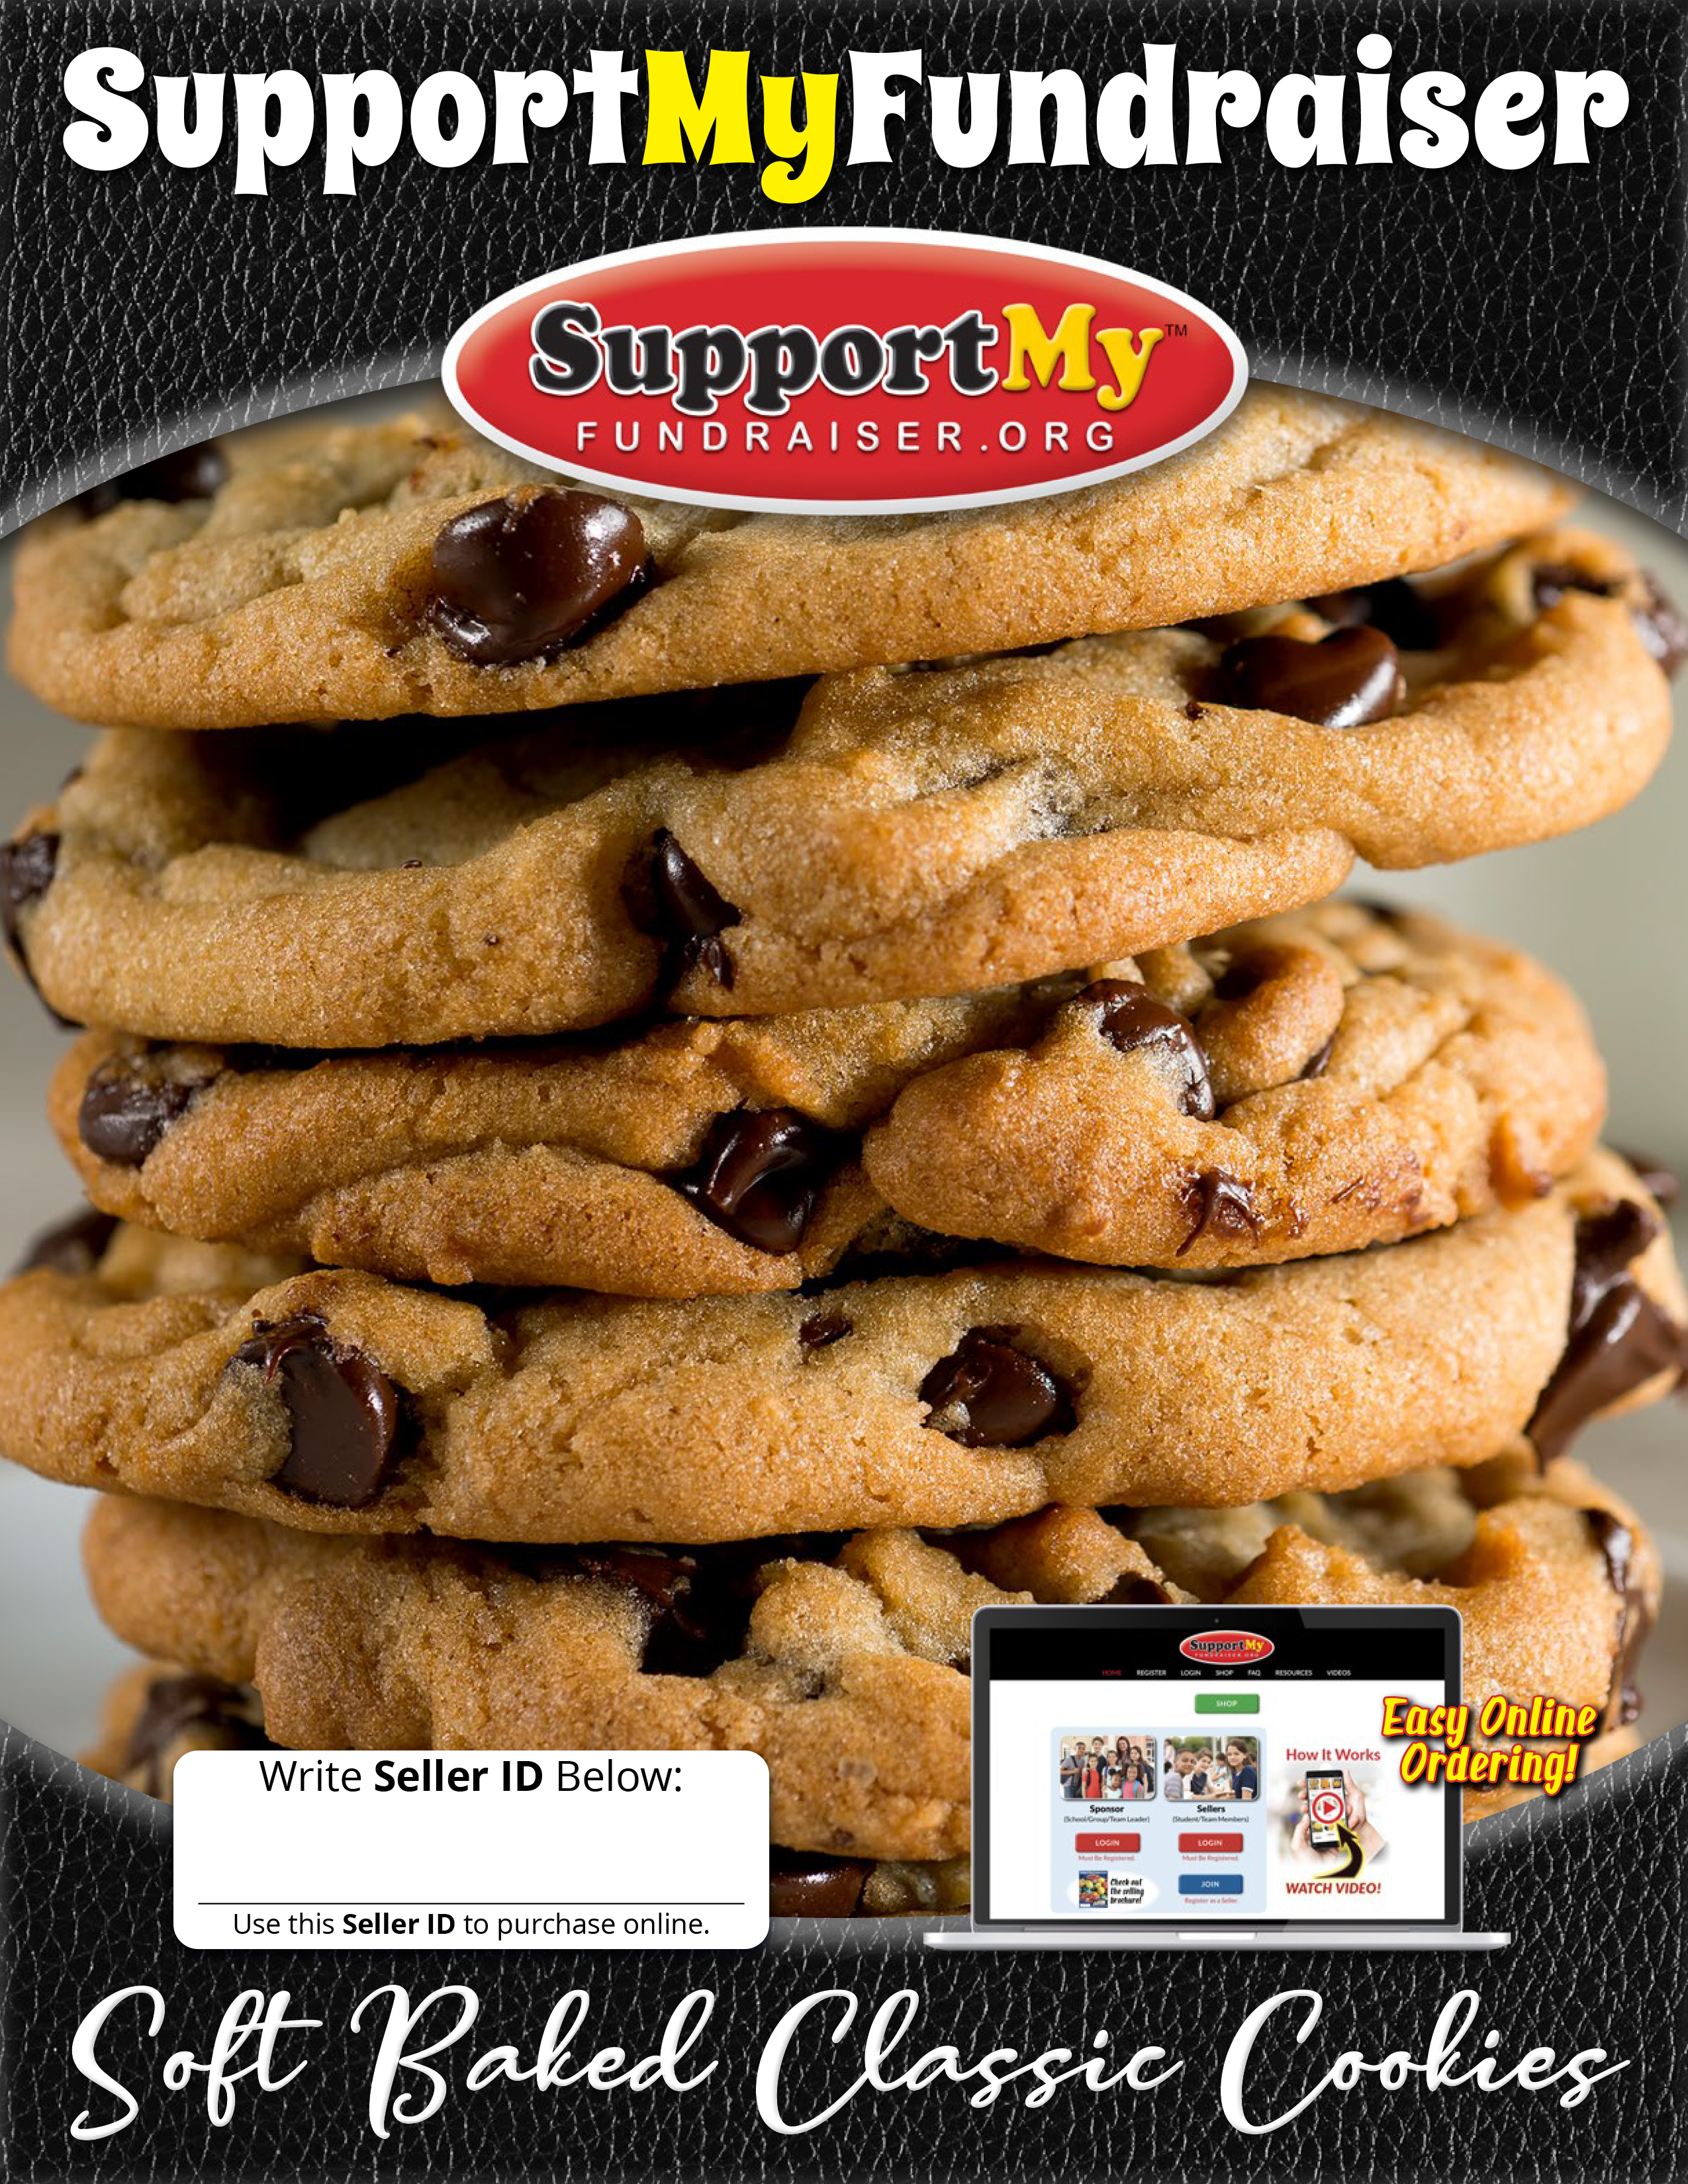 https://www.thegoodiesfactory.com/wp-content/uploads/2023/06/supportmyfundraiser-soft-baked-cookies-2023.png